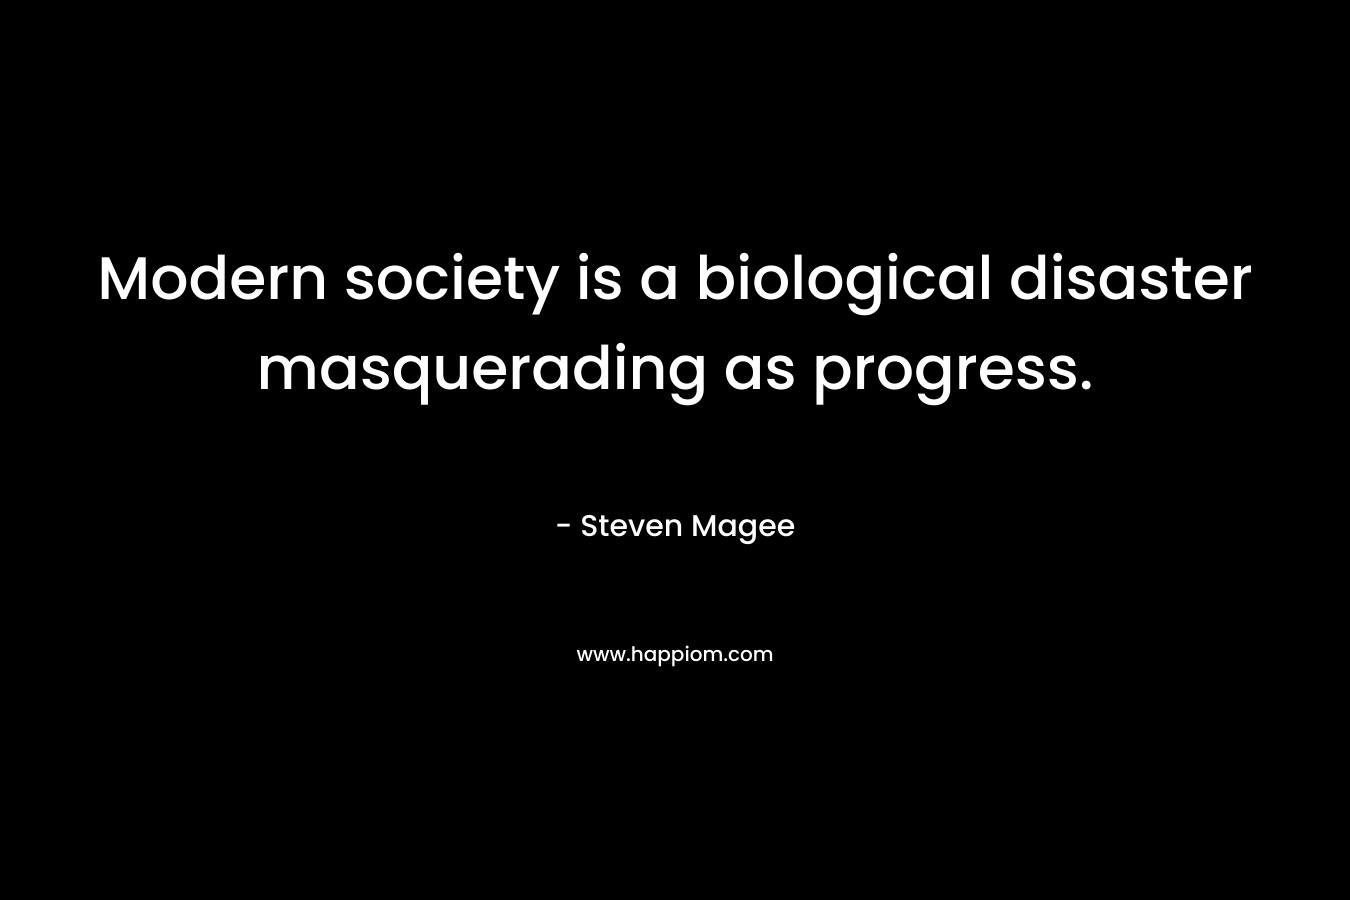 Modern society is a biological disaster masquerading as progress.